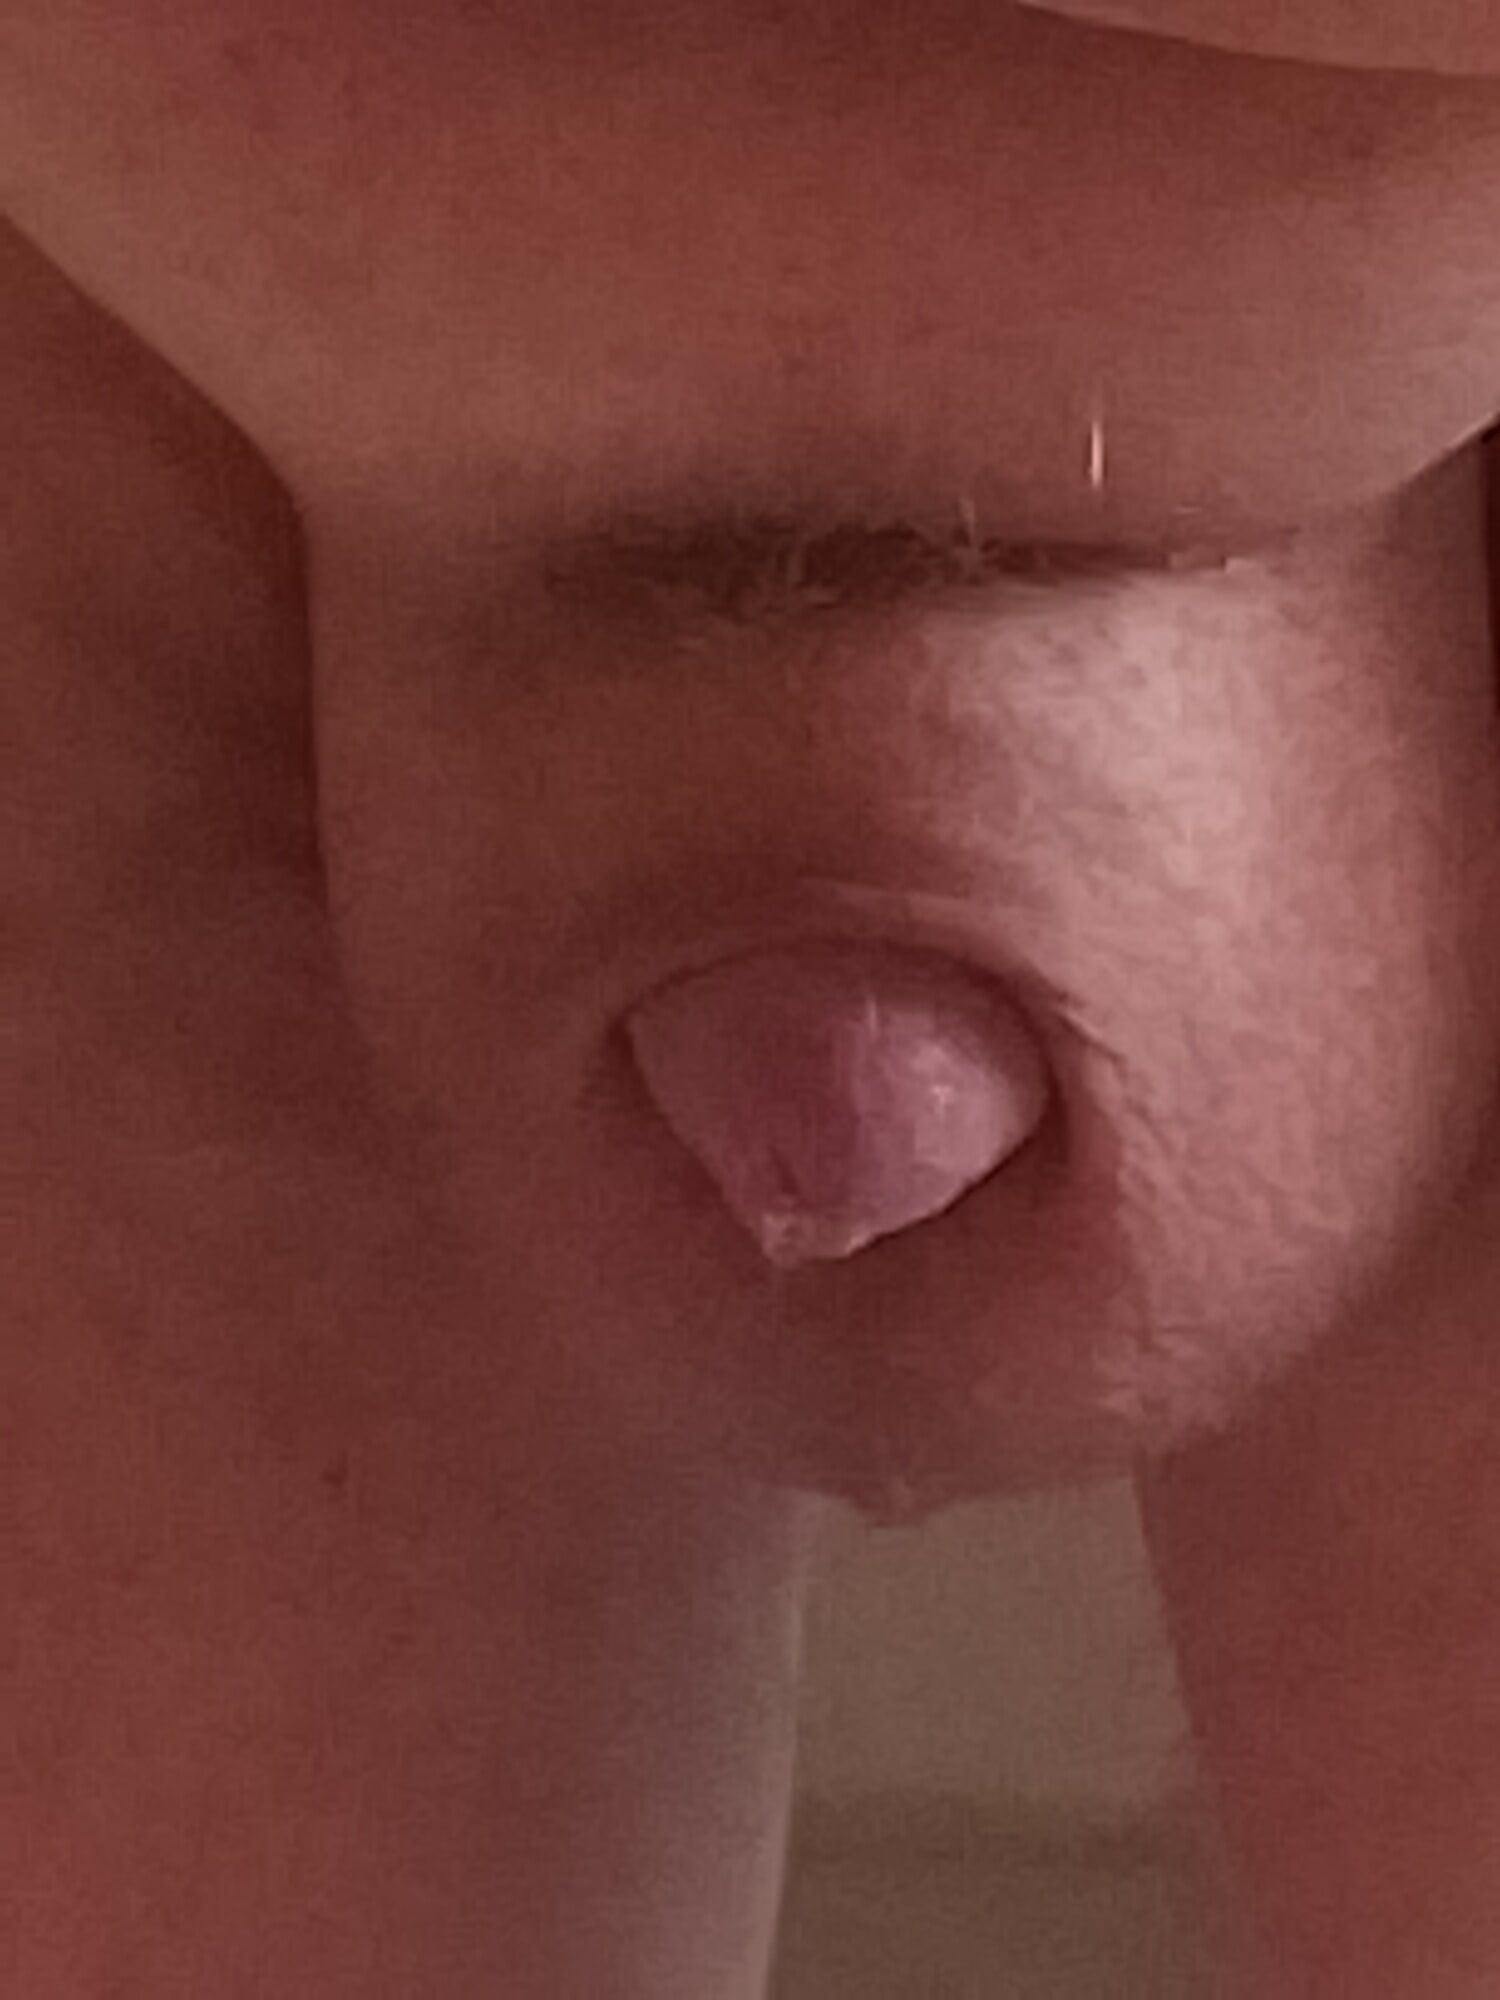 Exposed clitty dripping #7